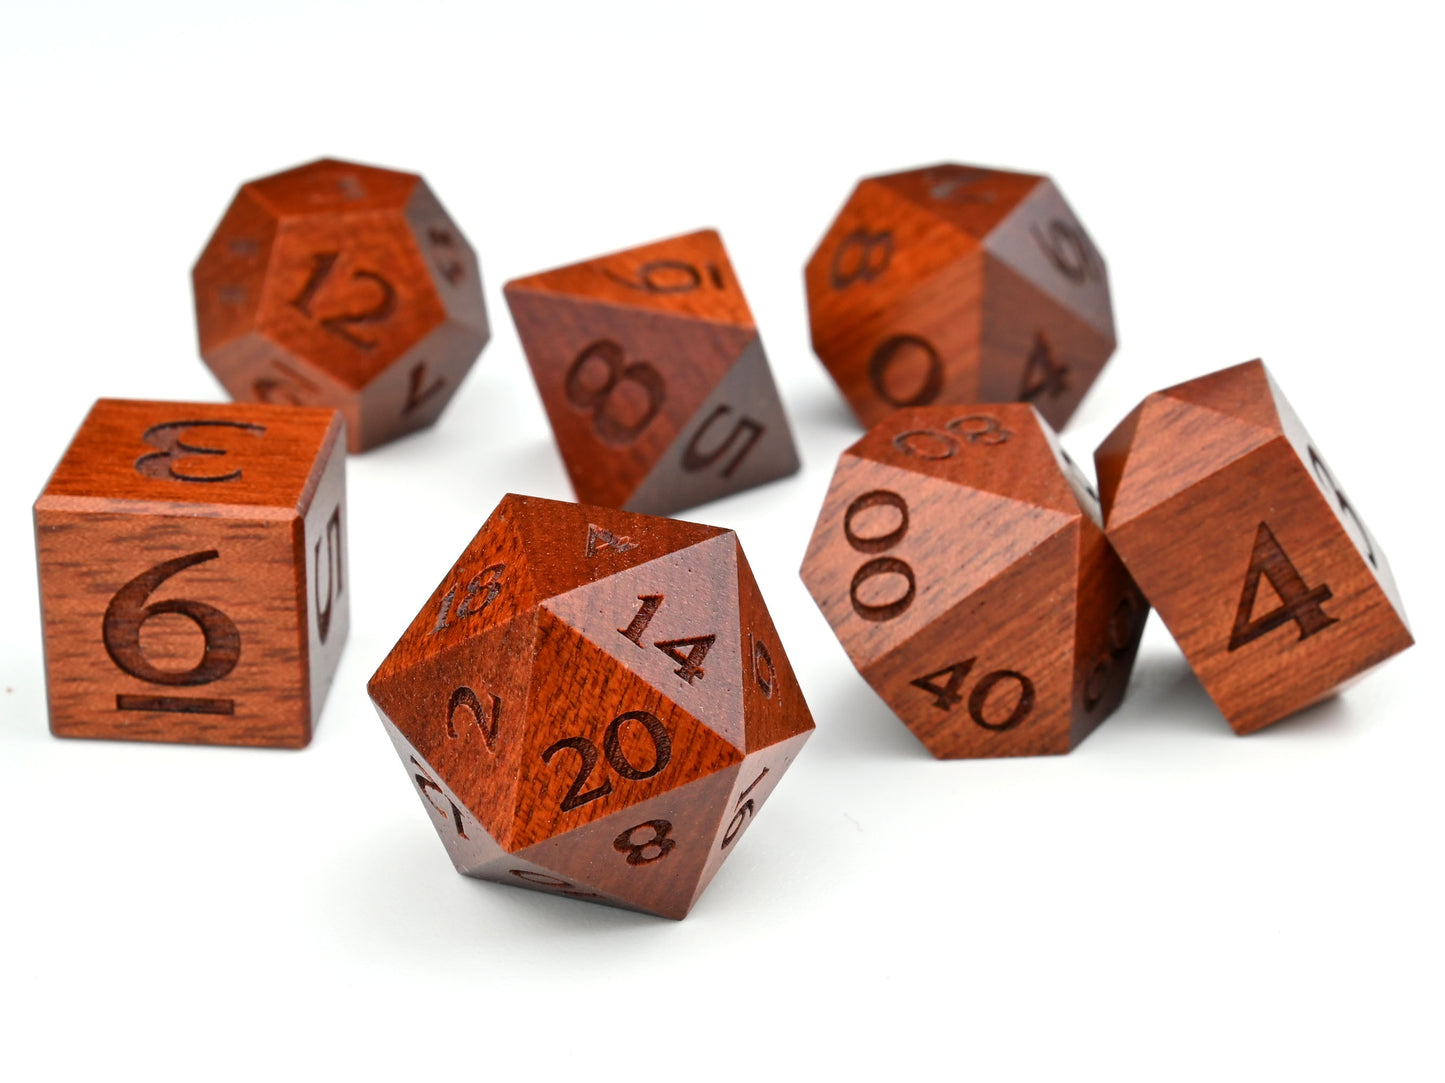 Bloodwood polyhedral dice set for dungeons and dragons rpg